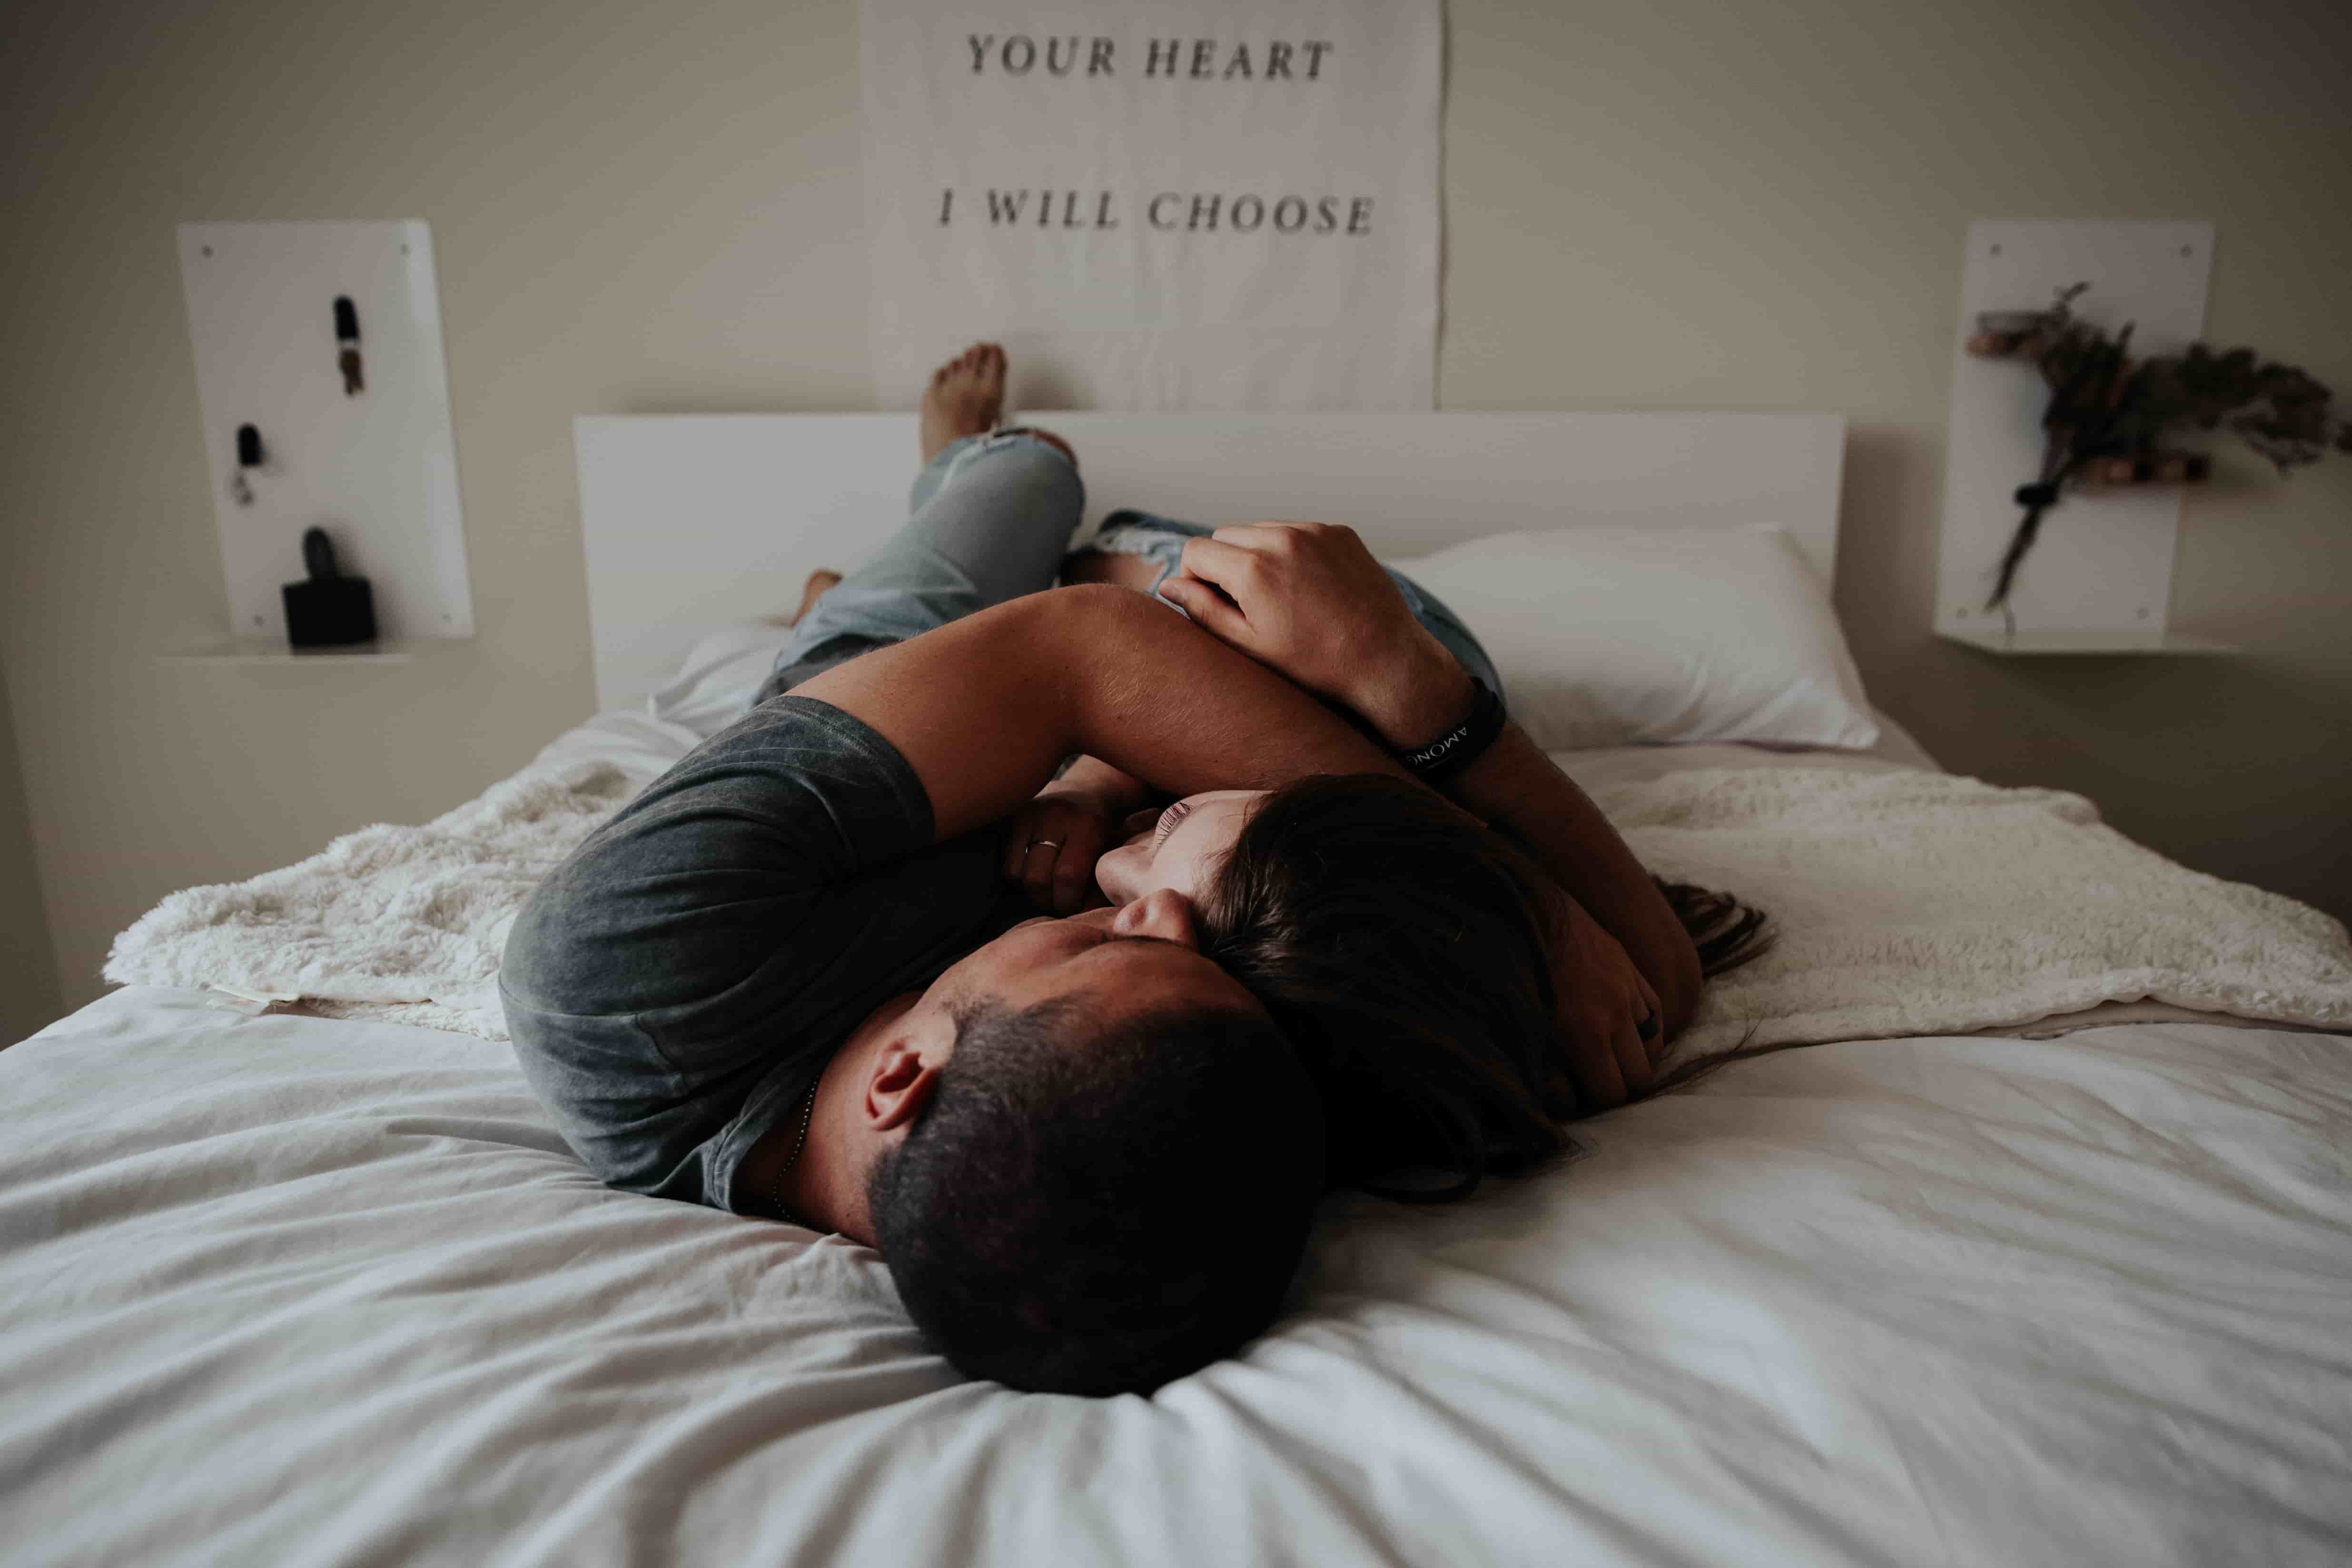 A couple lay together in bed, holding each other close and looking sad.